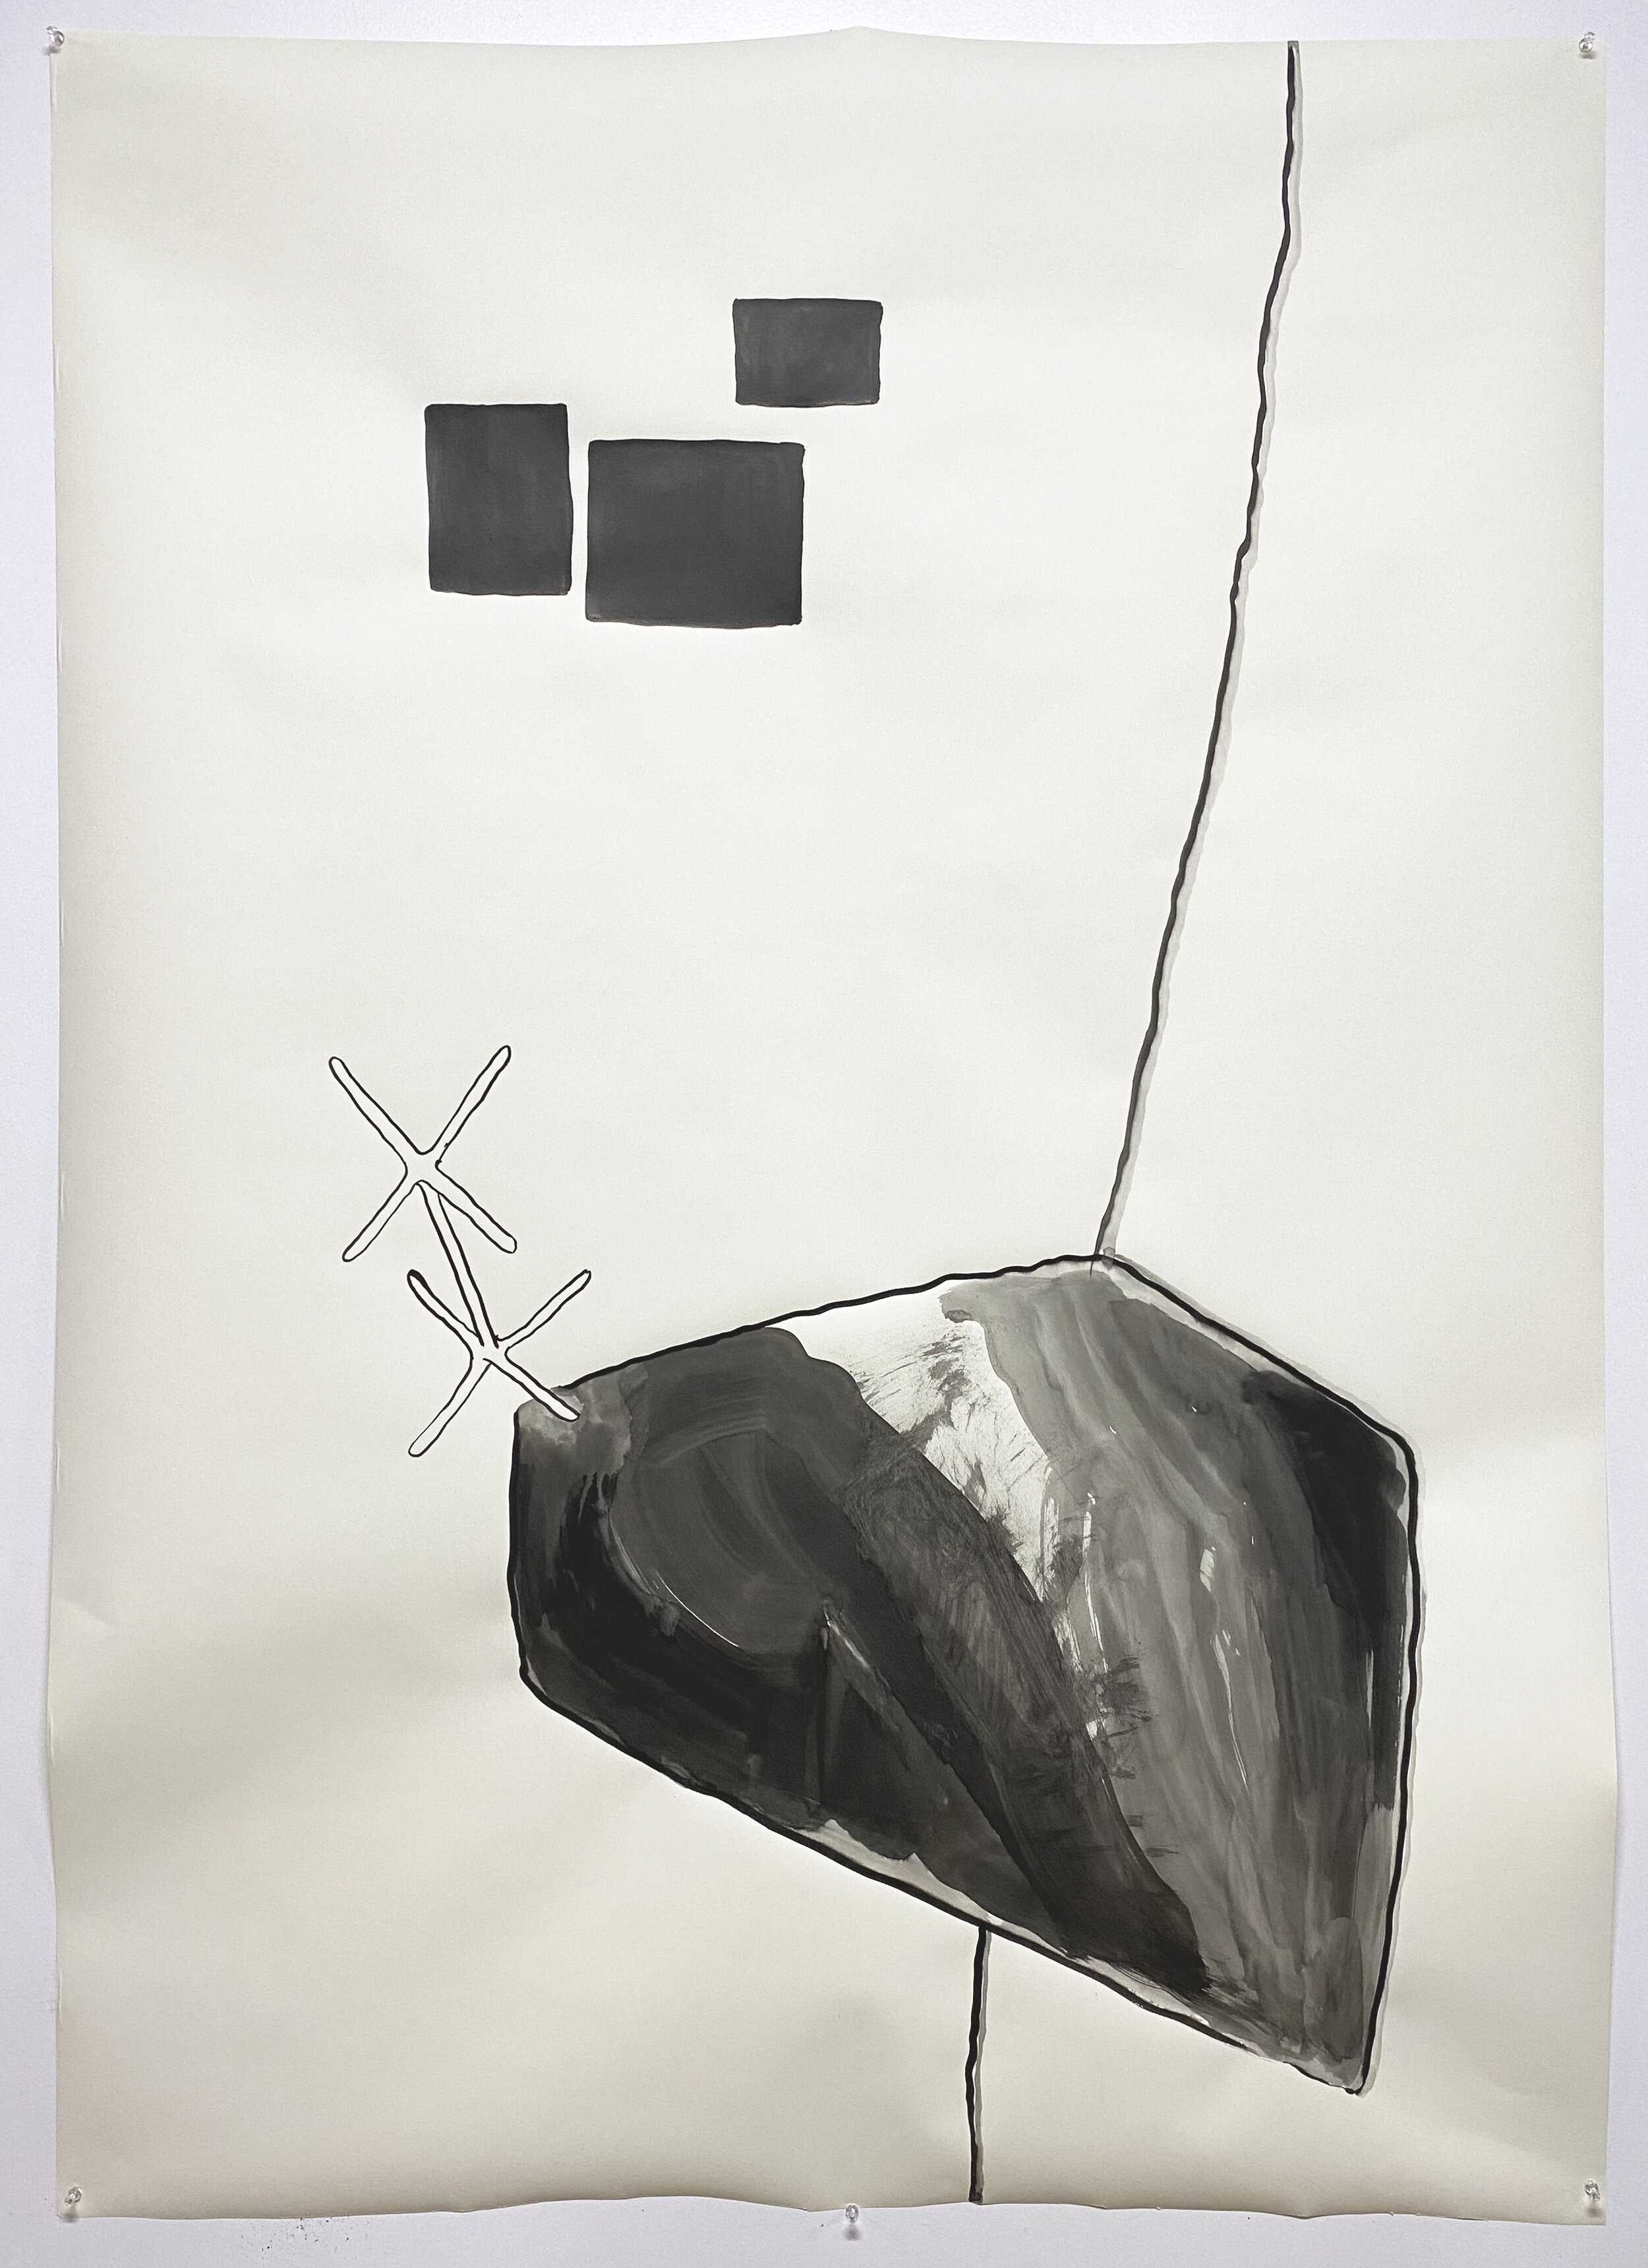 Untitled (Beckett at the Gallery), by Q&A